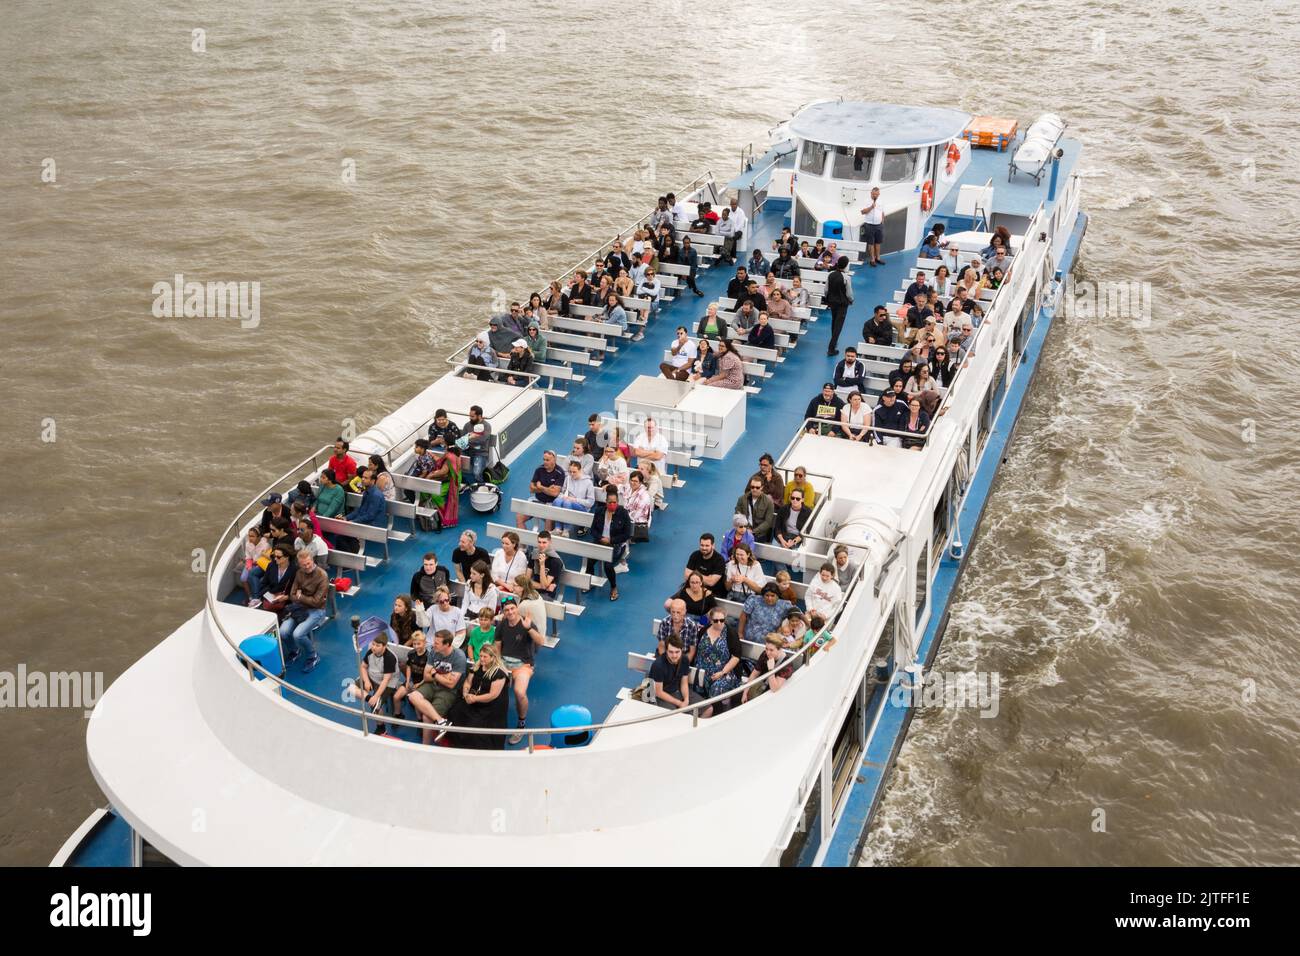 Closeup of tourists aboard a pleasure boat on the River Thames, London, England, UK Stock Photo